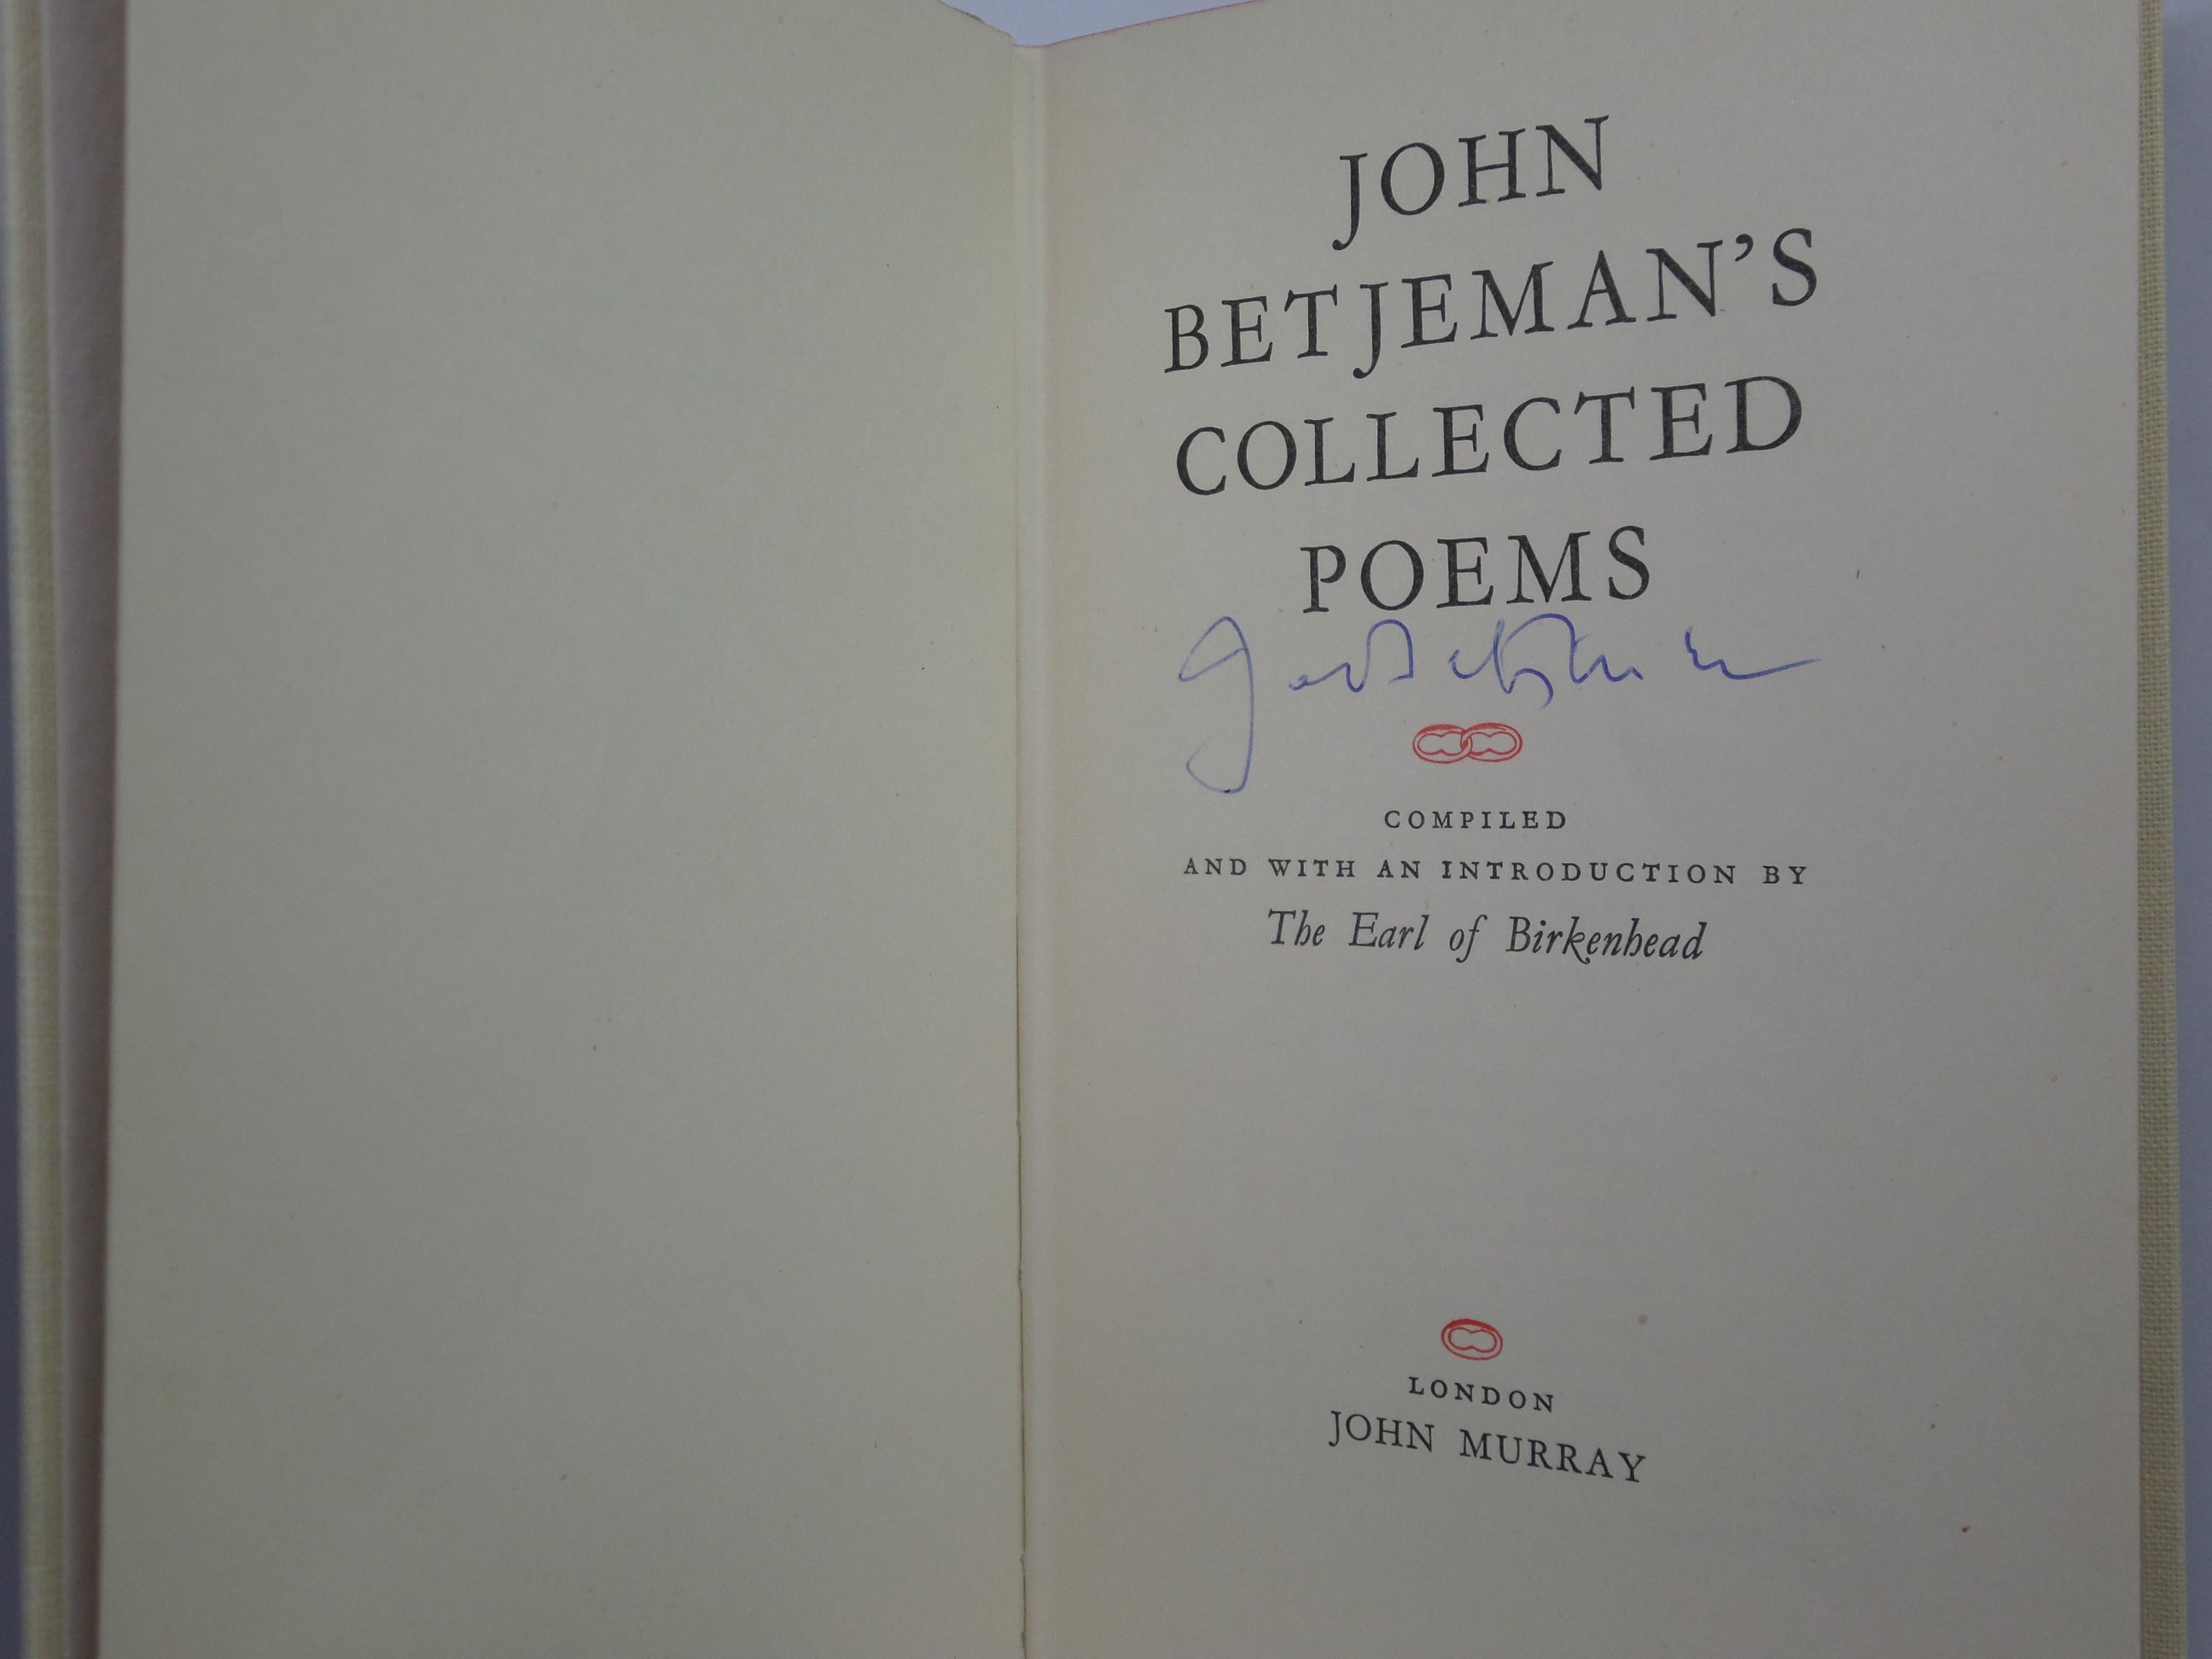 JOHN BETJEMAN'S COLLECTED POEMS 1960 SIGNED BY AUTHOR